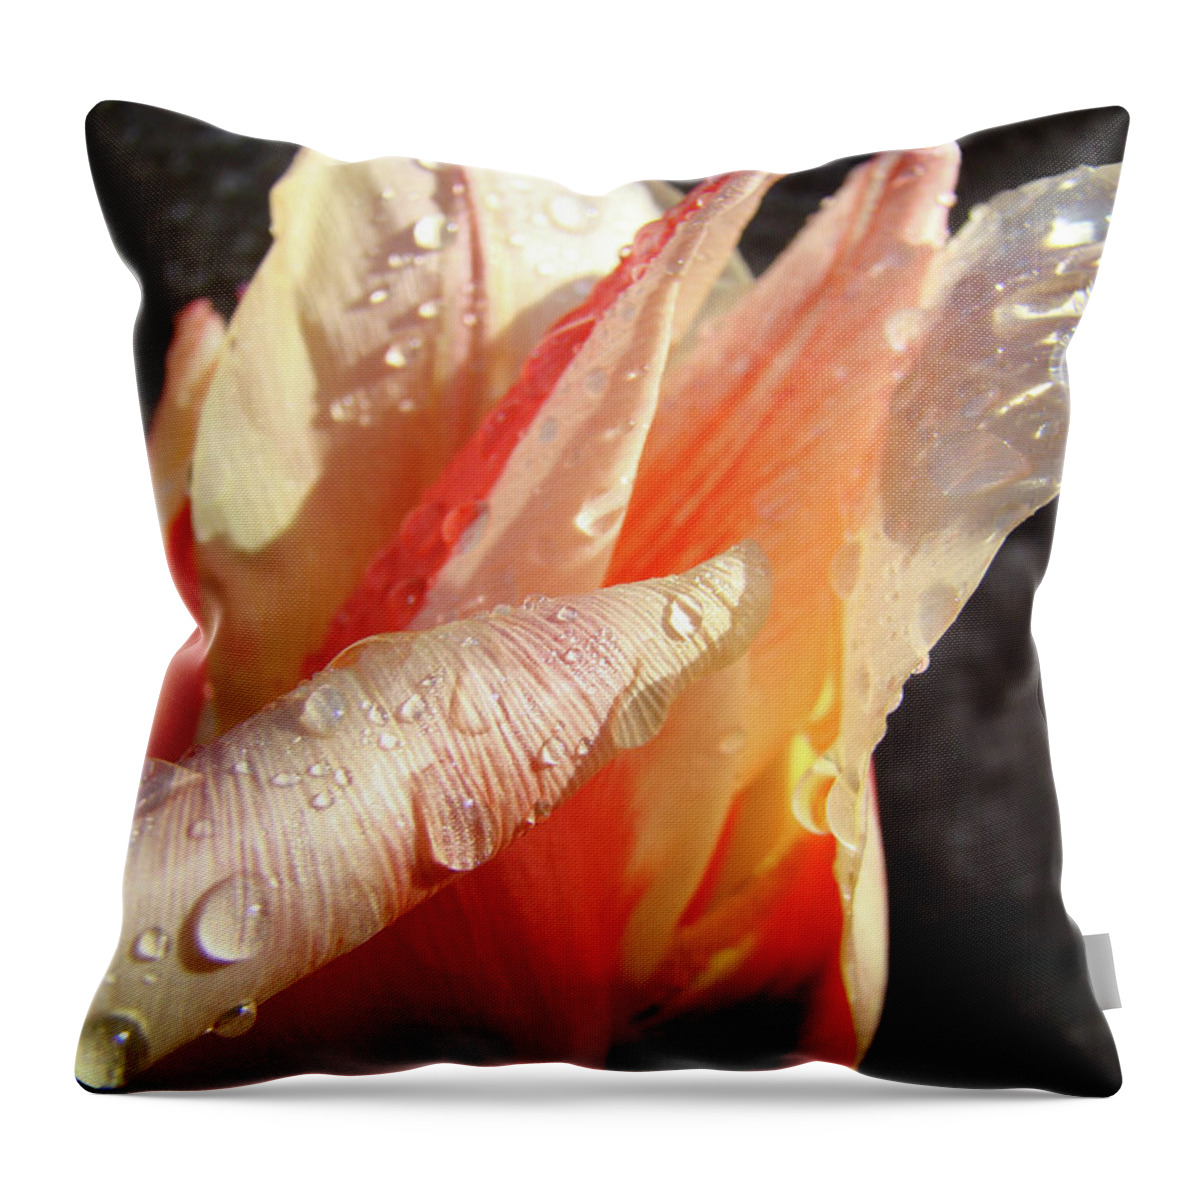 �tulips Artwork� Throw Pillow featuring the photograph TULIPS ARTWORK FLOWERS Floral Art Prints Spring Peach Tulip Flower Macro by Patti Baslee